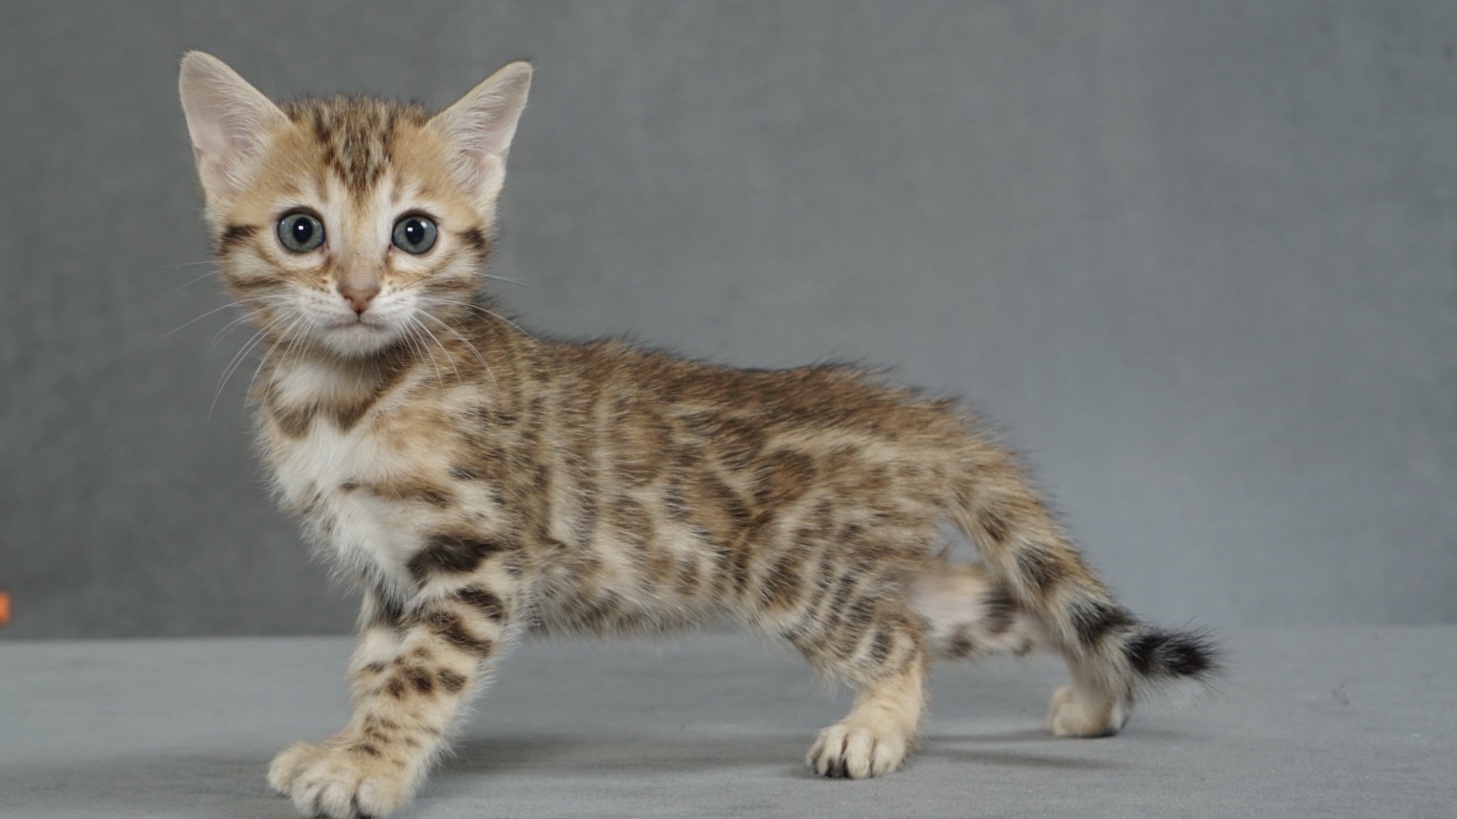 Available Bengal Kittens For Sale - BoydsBengals